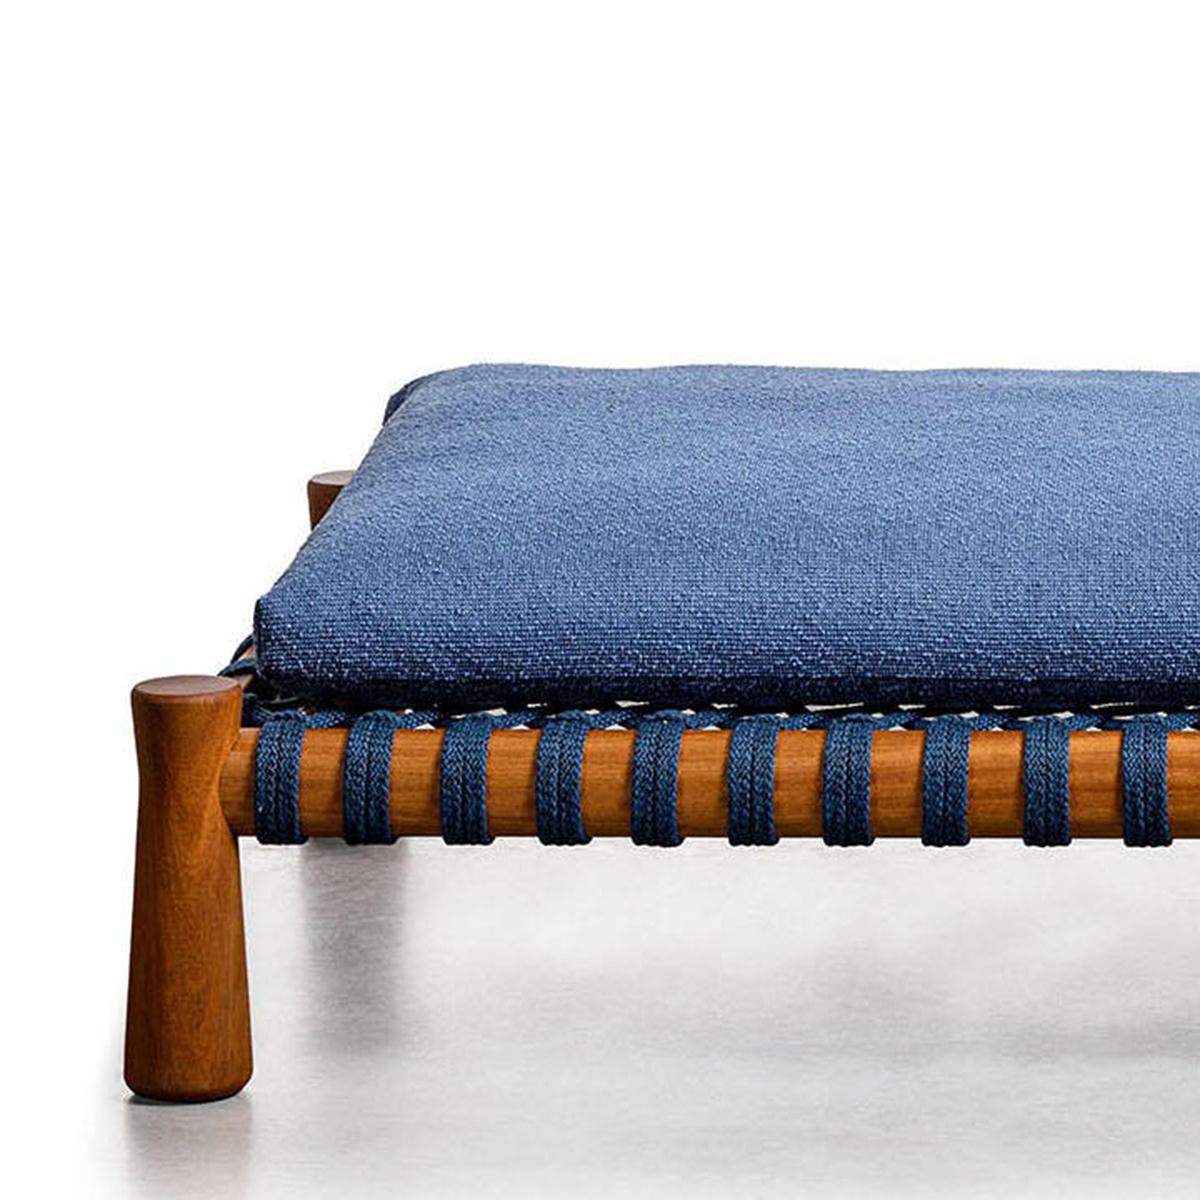 Daybed Ellaby Iroko with structure in solid iroko wood
in oiled finish and with woven nautical rope in blue finish. 
With matress in L175xD79xH16cm with removable covering.
Matress covered in outdoor fabric in Blue finish (Cat C.).
Cushion